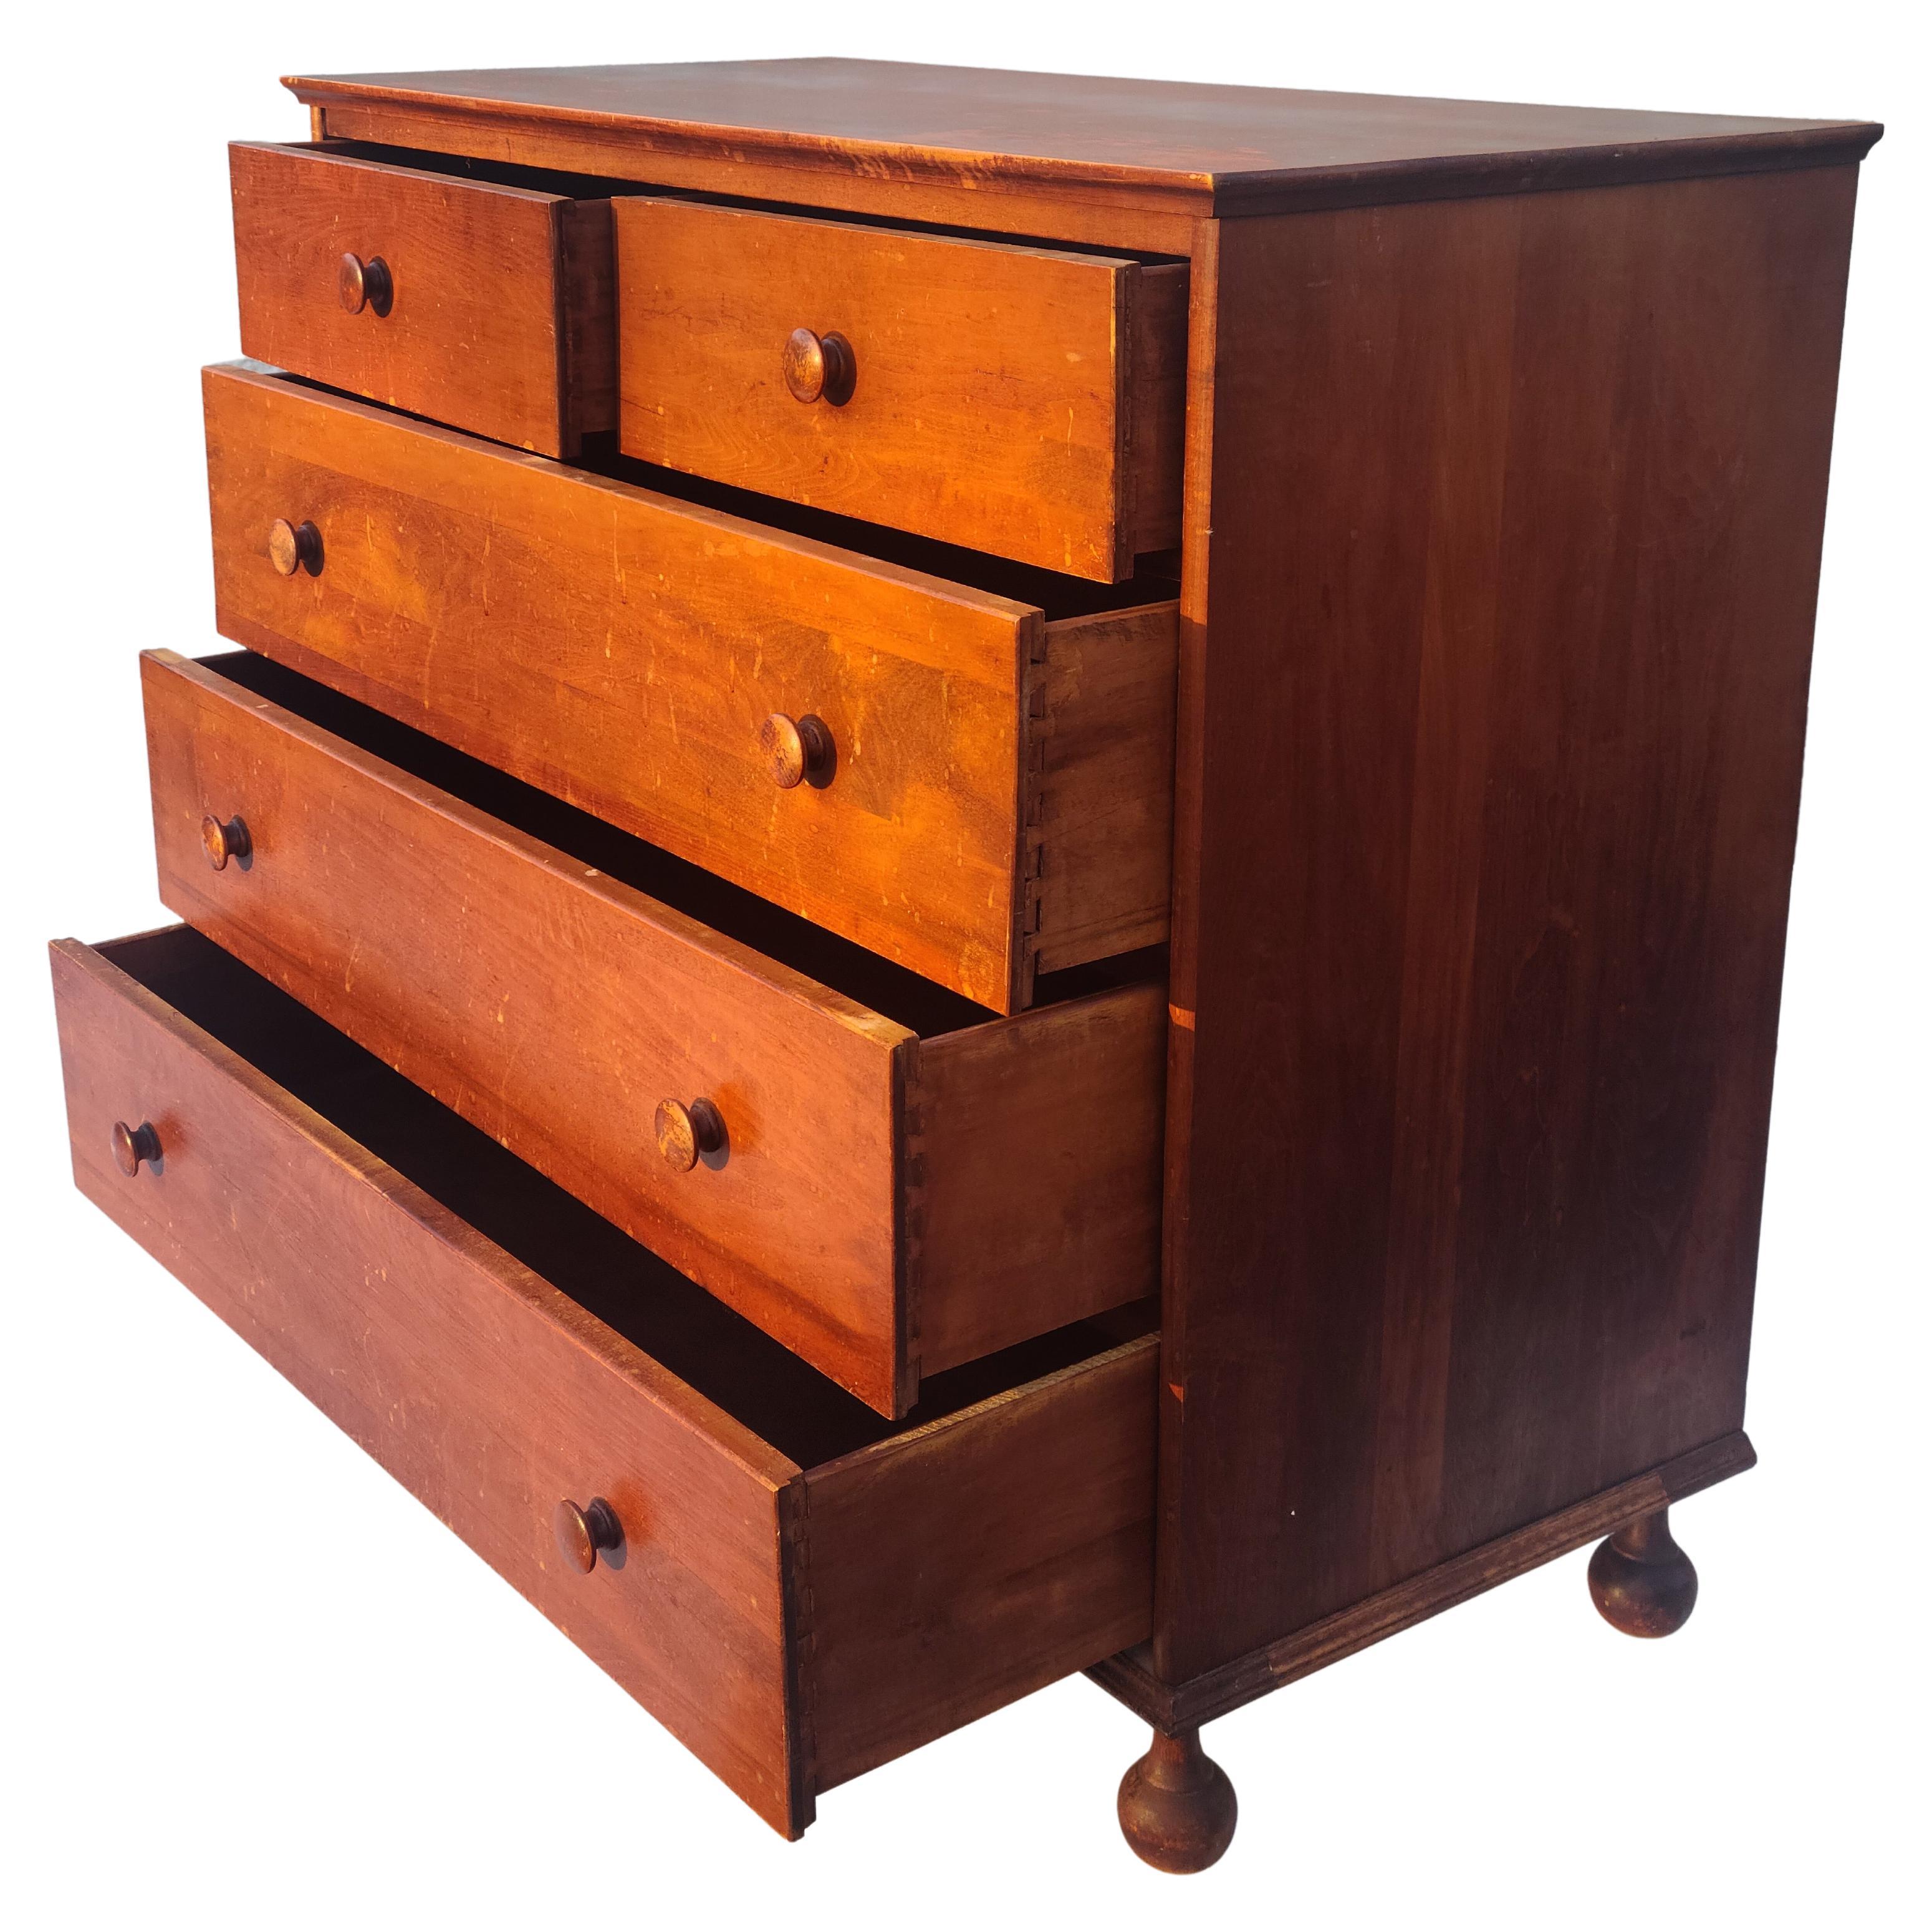 Connant Ball 5 drawer chest. American Revival circa 1935. These legs are really lovely. The chest appears to have had a faux bird's-eye finish. The finish on the top is not perfect. The overall patina is pretty nice. We can lightly refinish the top